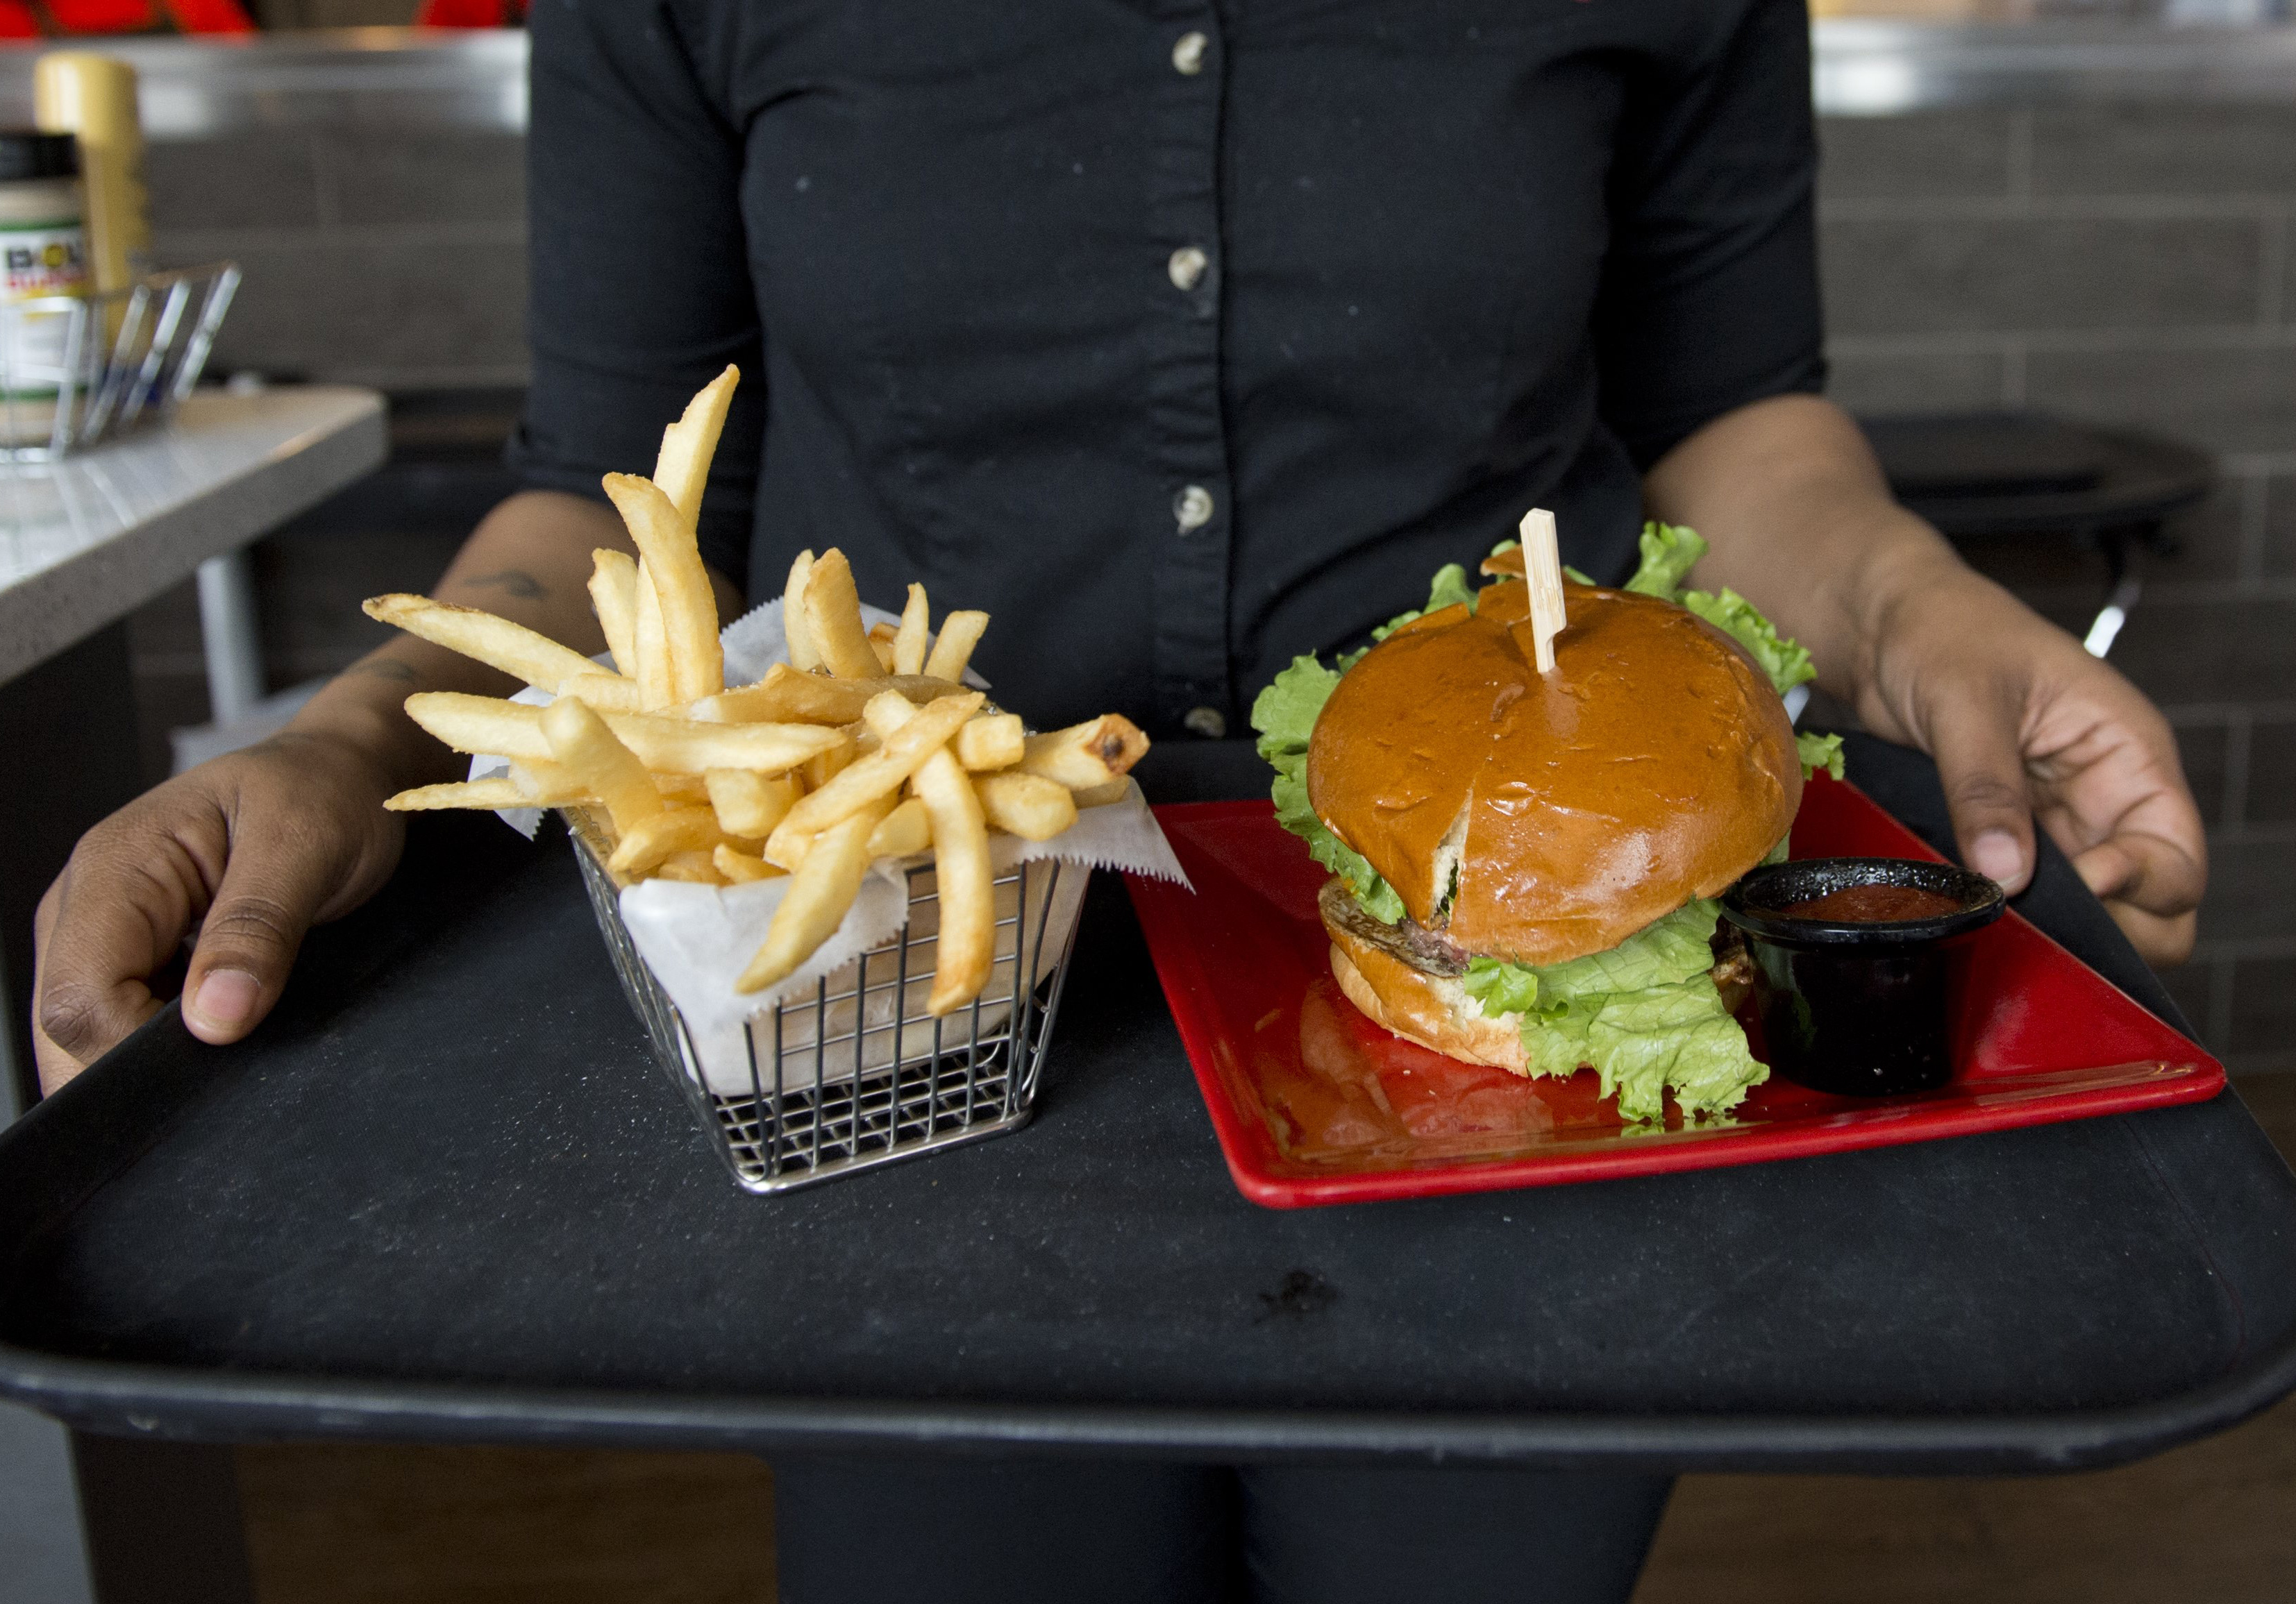 A server carries a tray with a hamburger and french fries at Bolt Burgers in Washington, DC on February 25, 2014. (Saul Loeb—AFP/Getty Images)